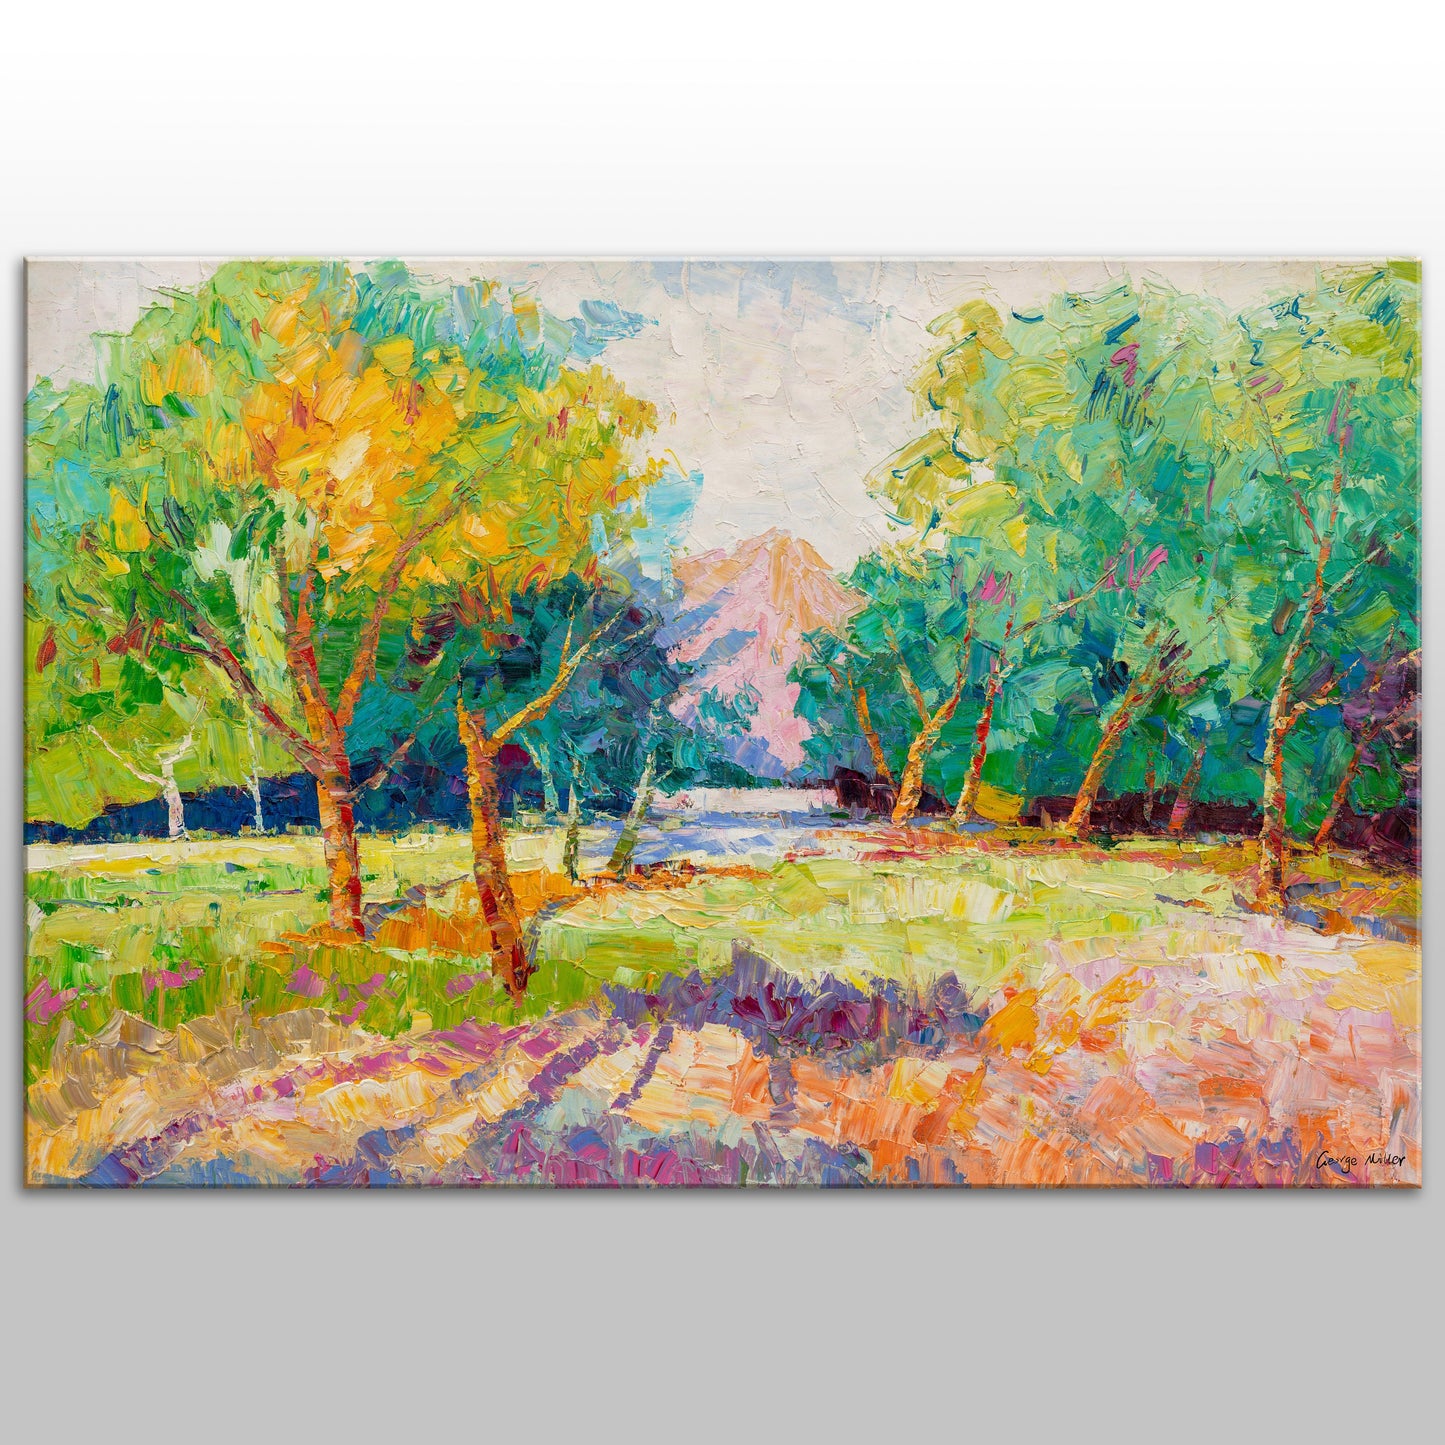 Spring Landscape Oil Painting, Artwork, Oil Painting, Large Landscape Paintings On Canvas, Oversized Wall Art, Impasto Painting